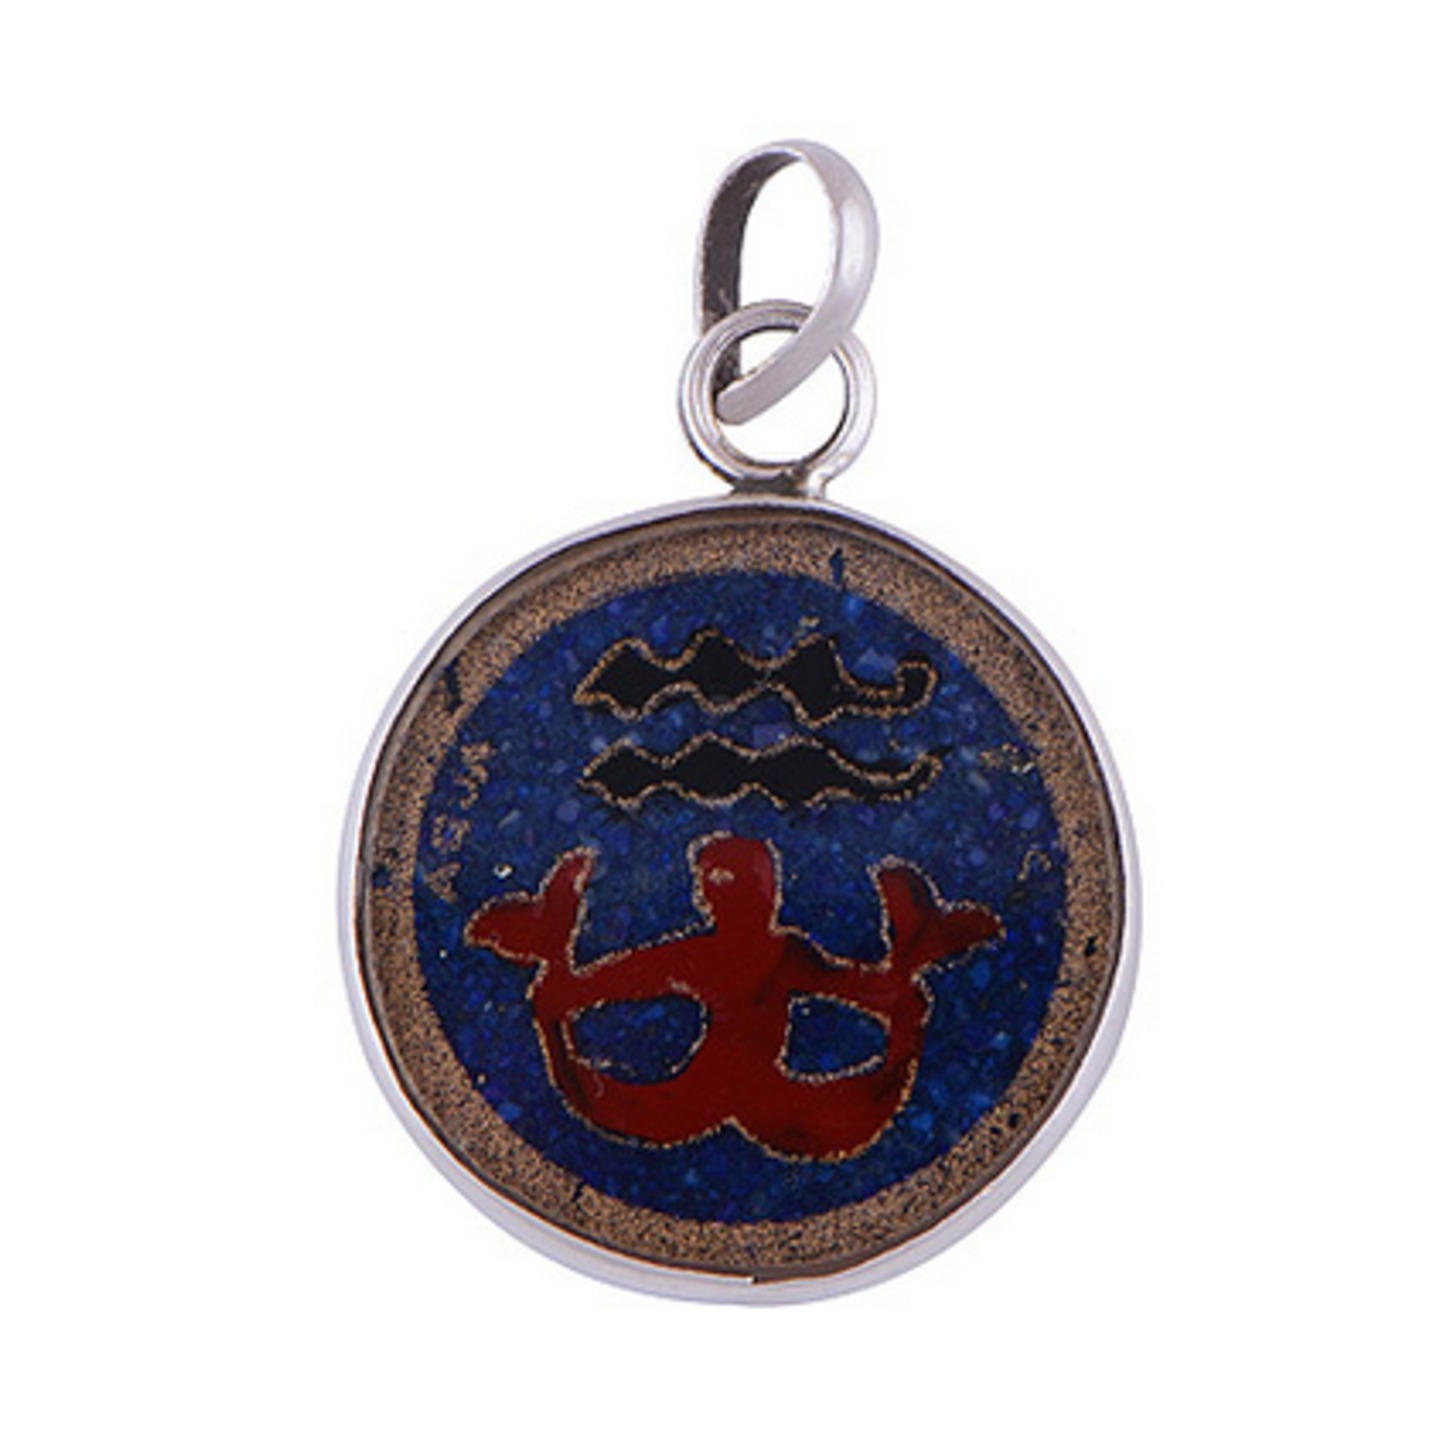 The Hand-Painted Silver Pendant